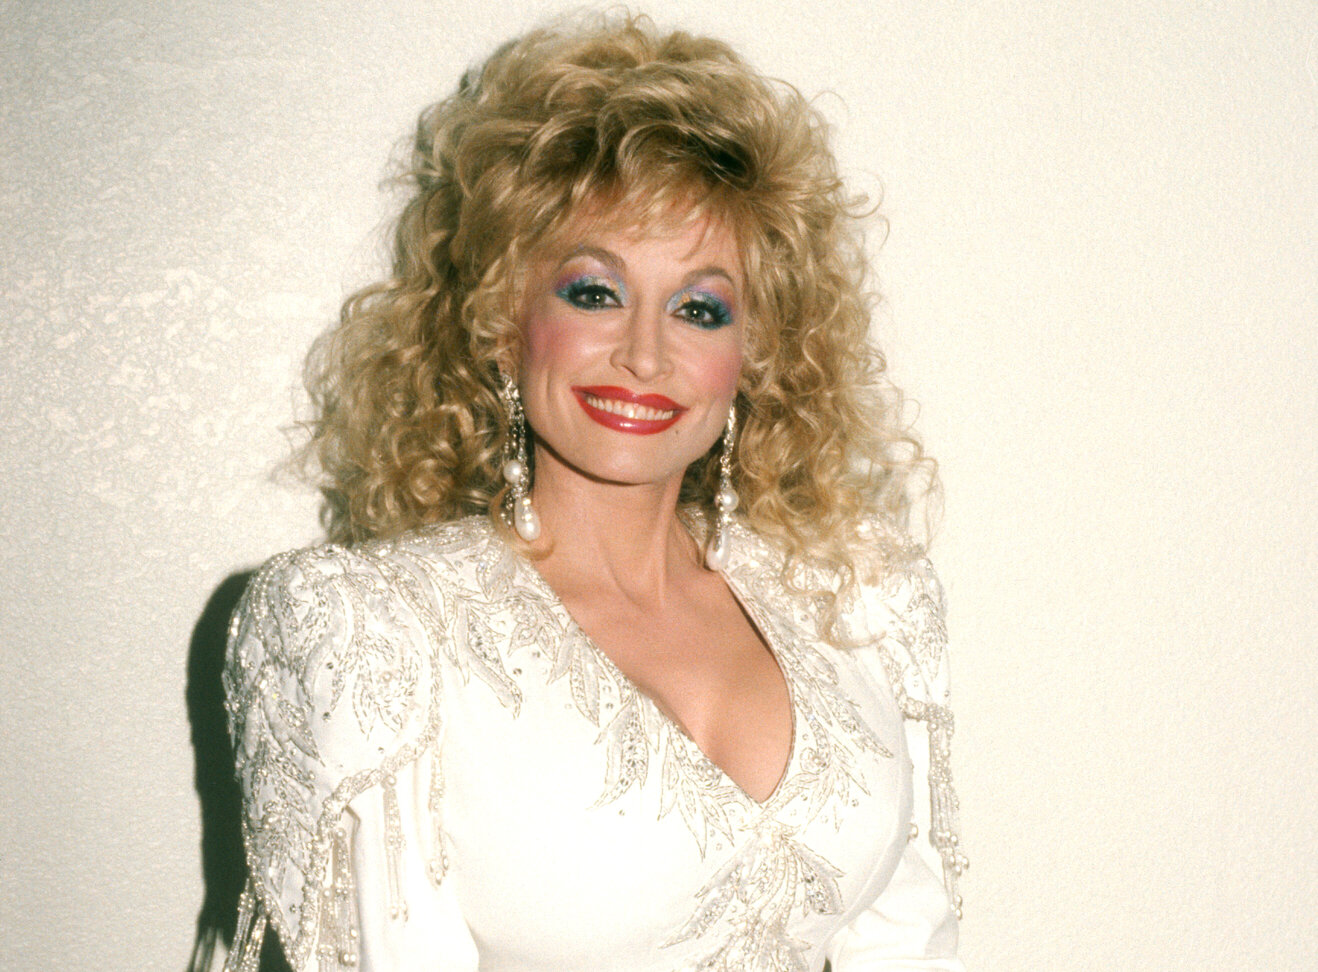 Dolly Parton poses for a portrait in a white dress in 1988.